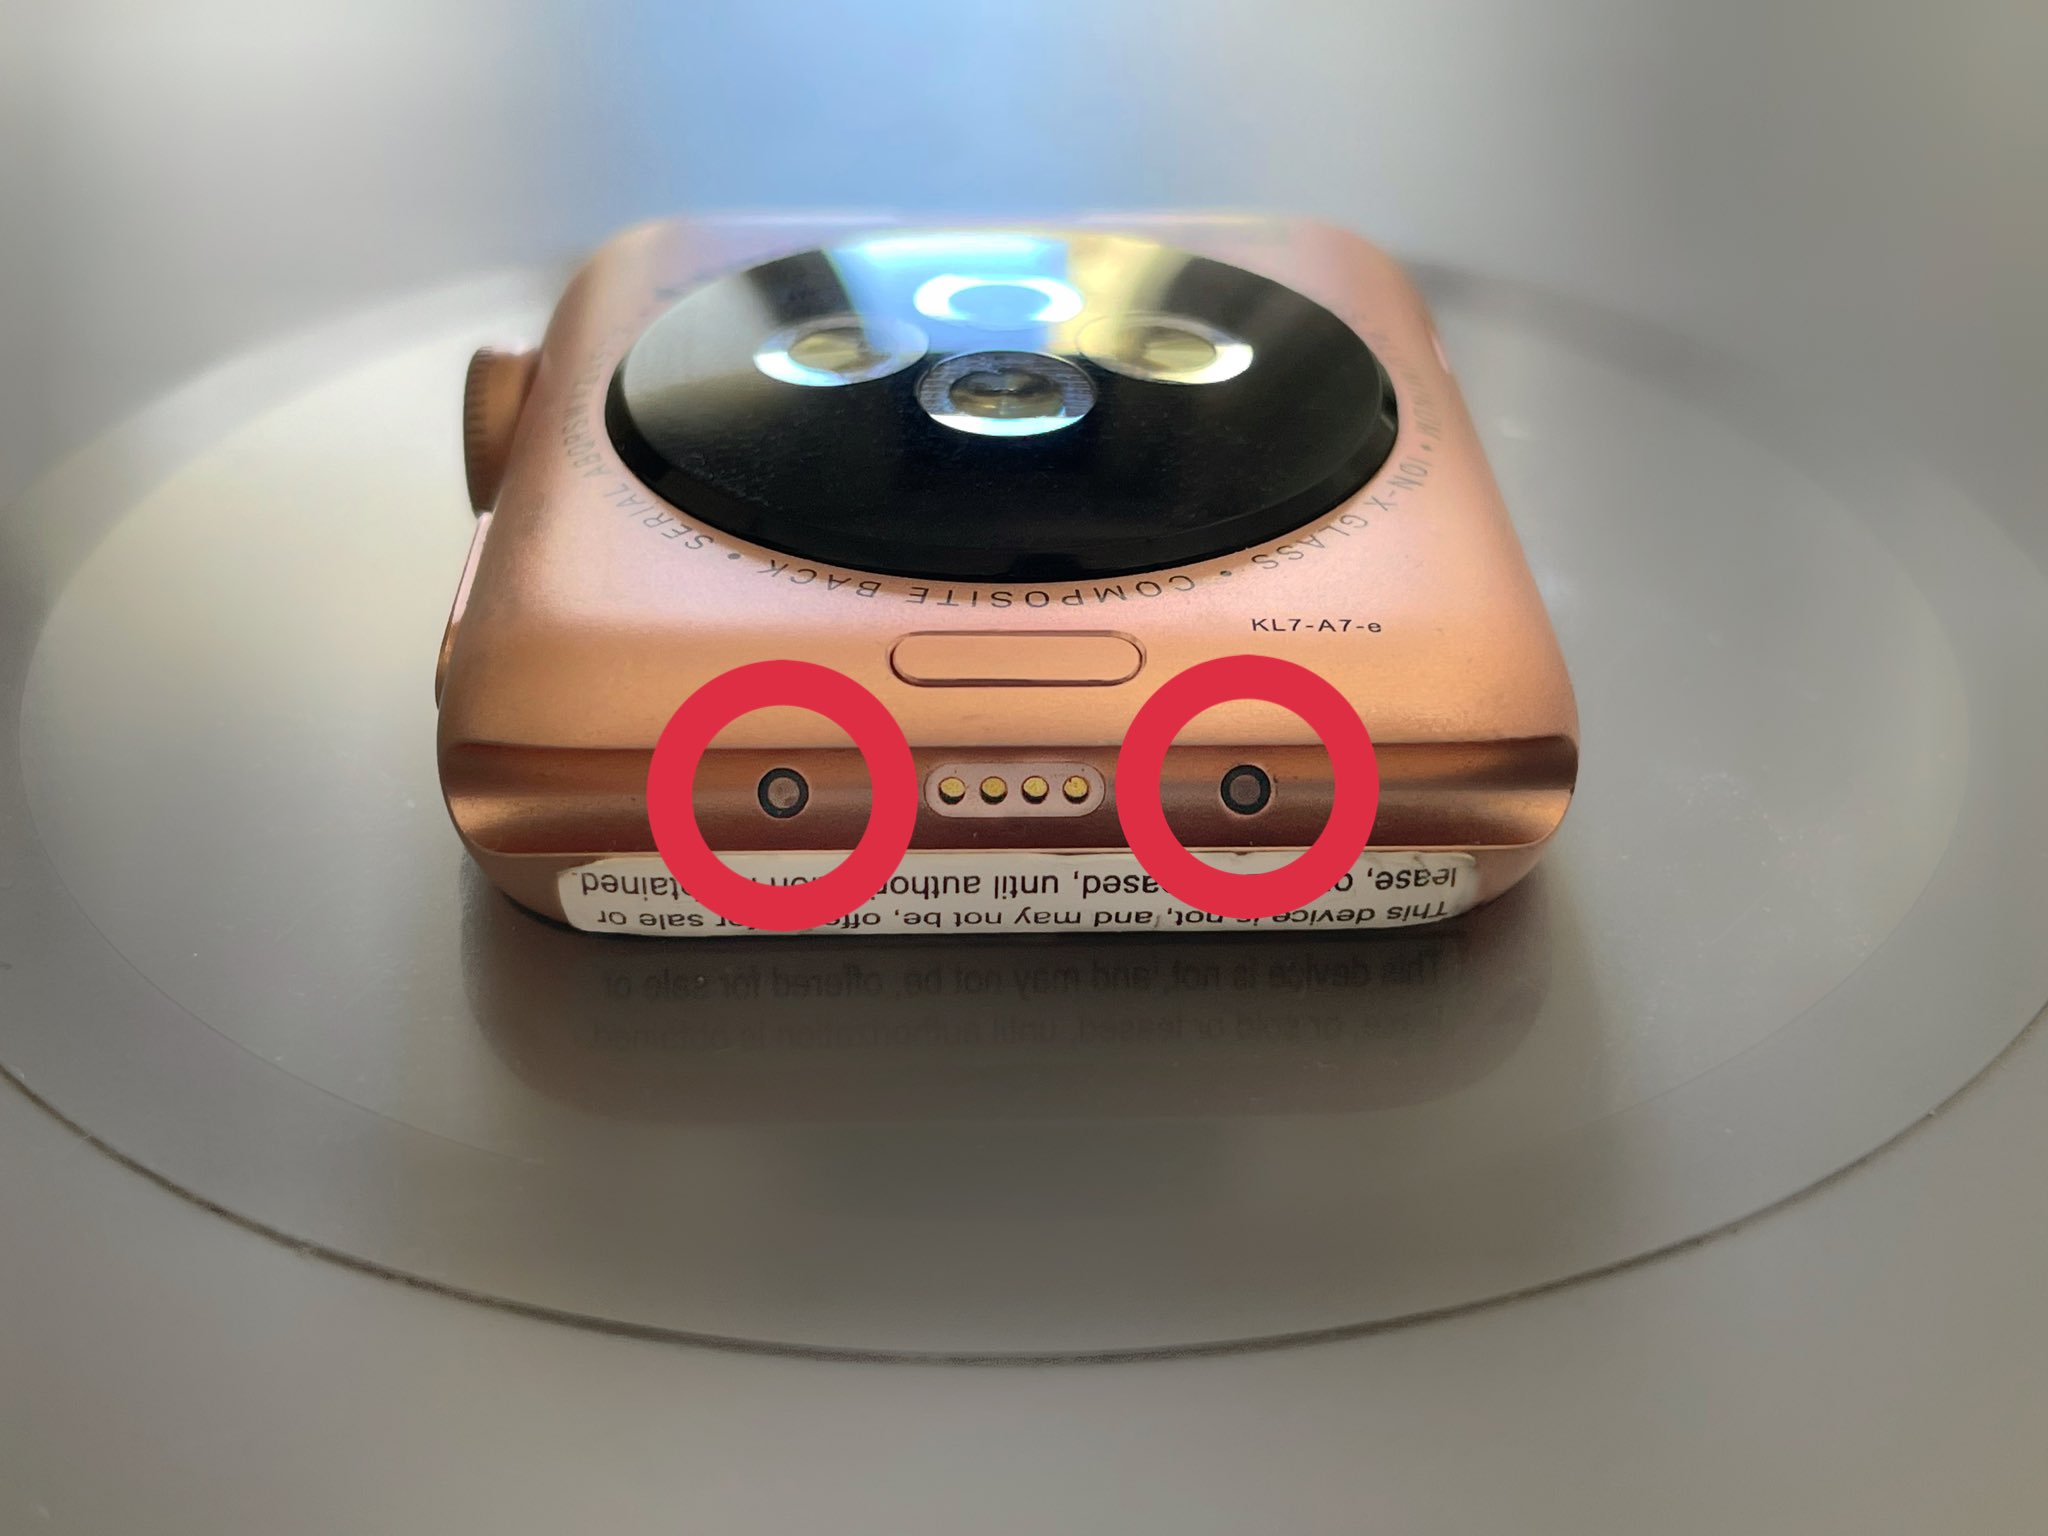 A photo of Apple Watch prototype showing two iPad-like Smart Connector contacts in the band area